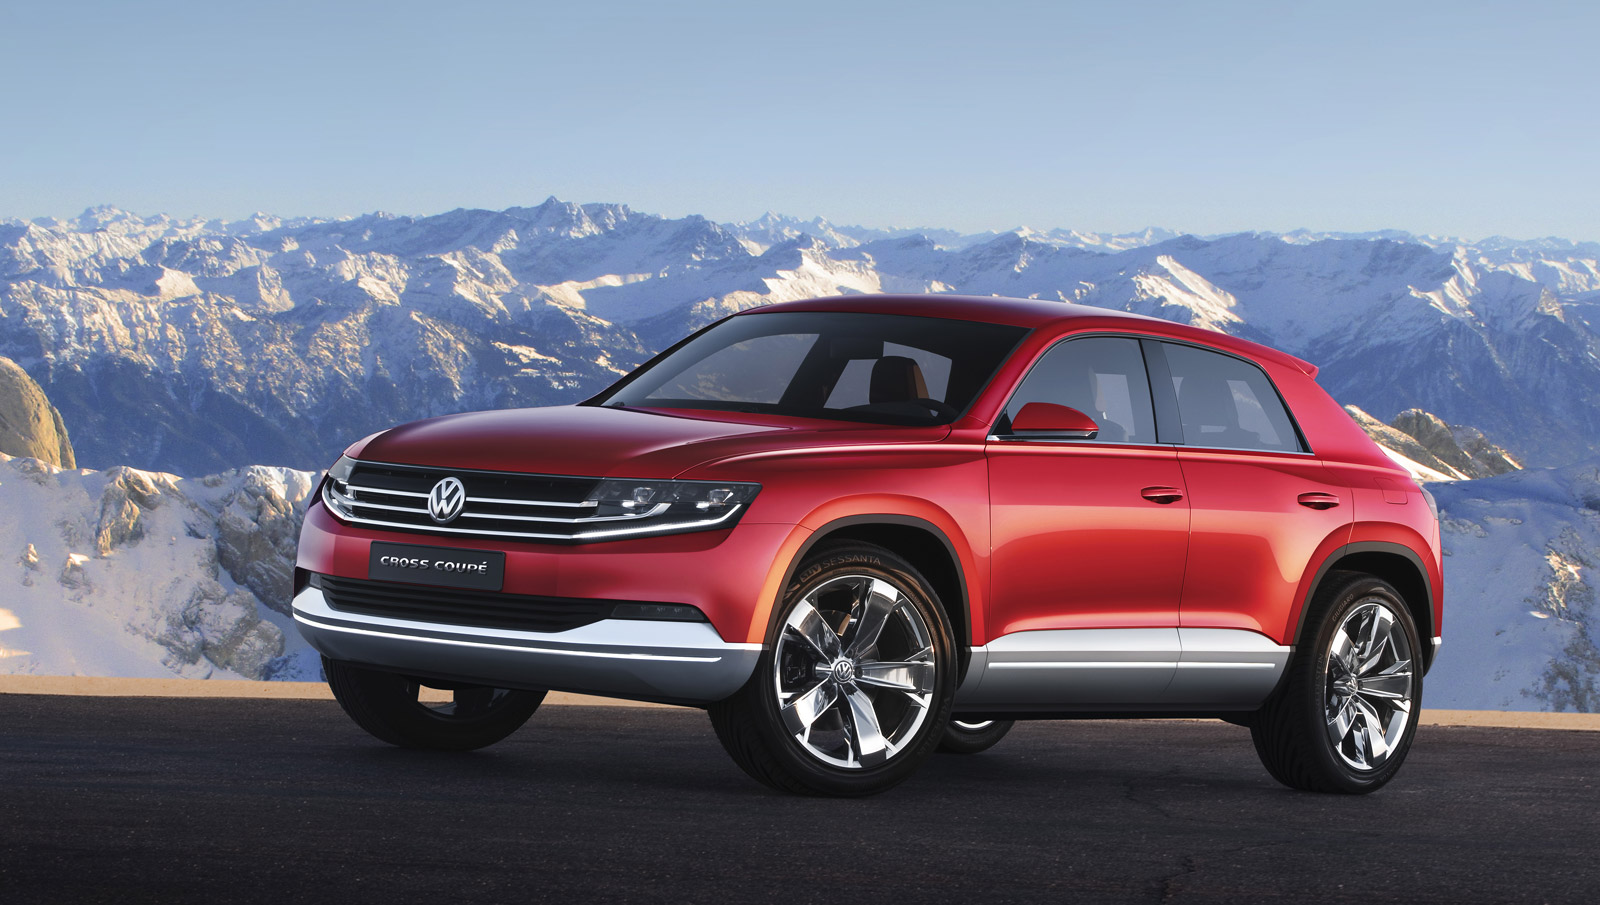 Volkswagen Cross Coupe TDI Plug-In Hybrid Concept Makes Debut